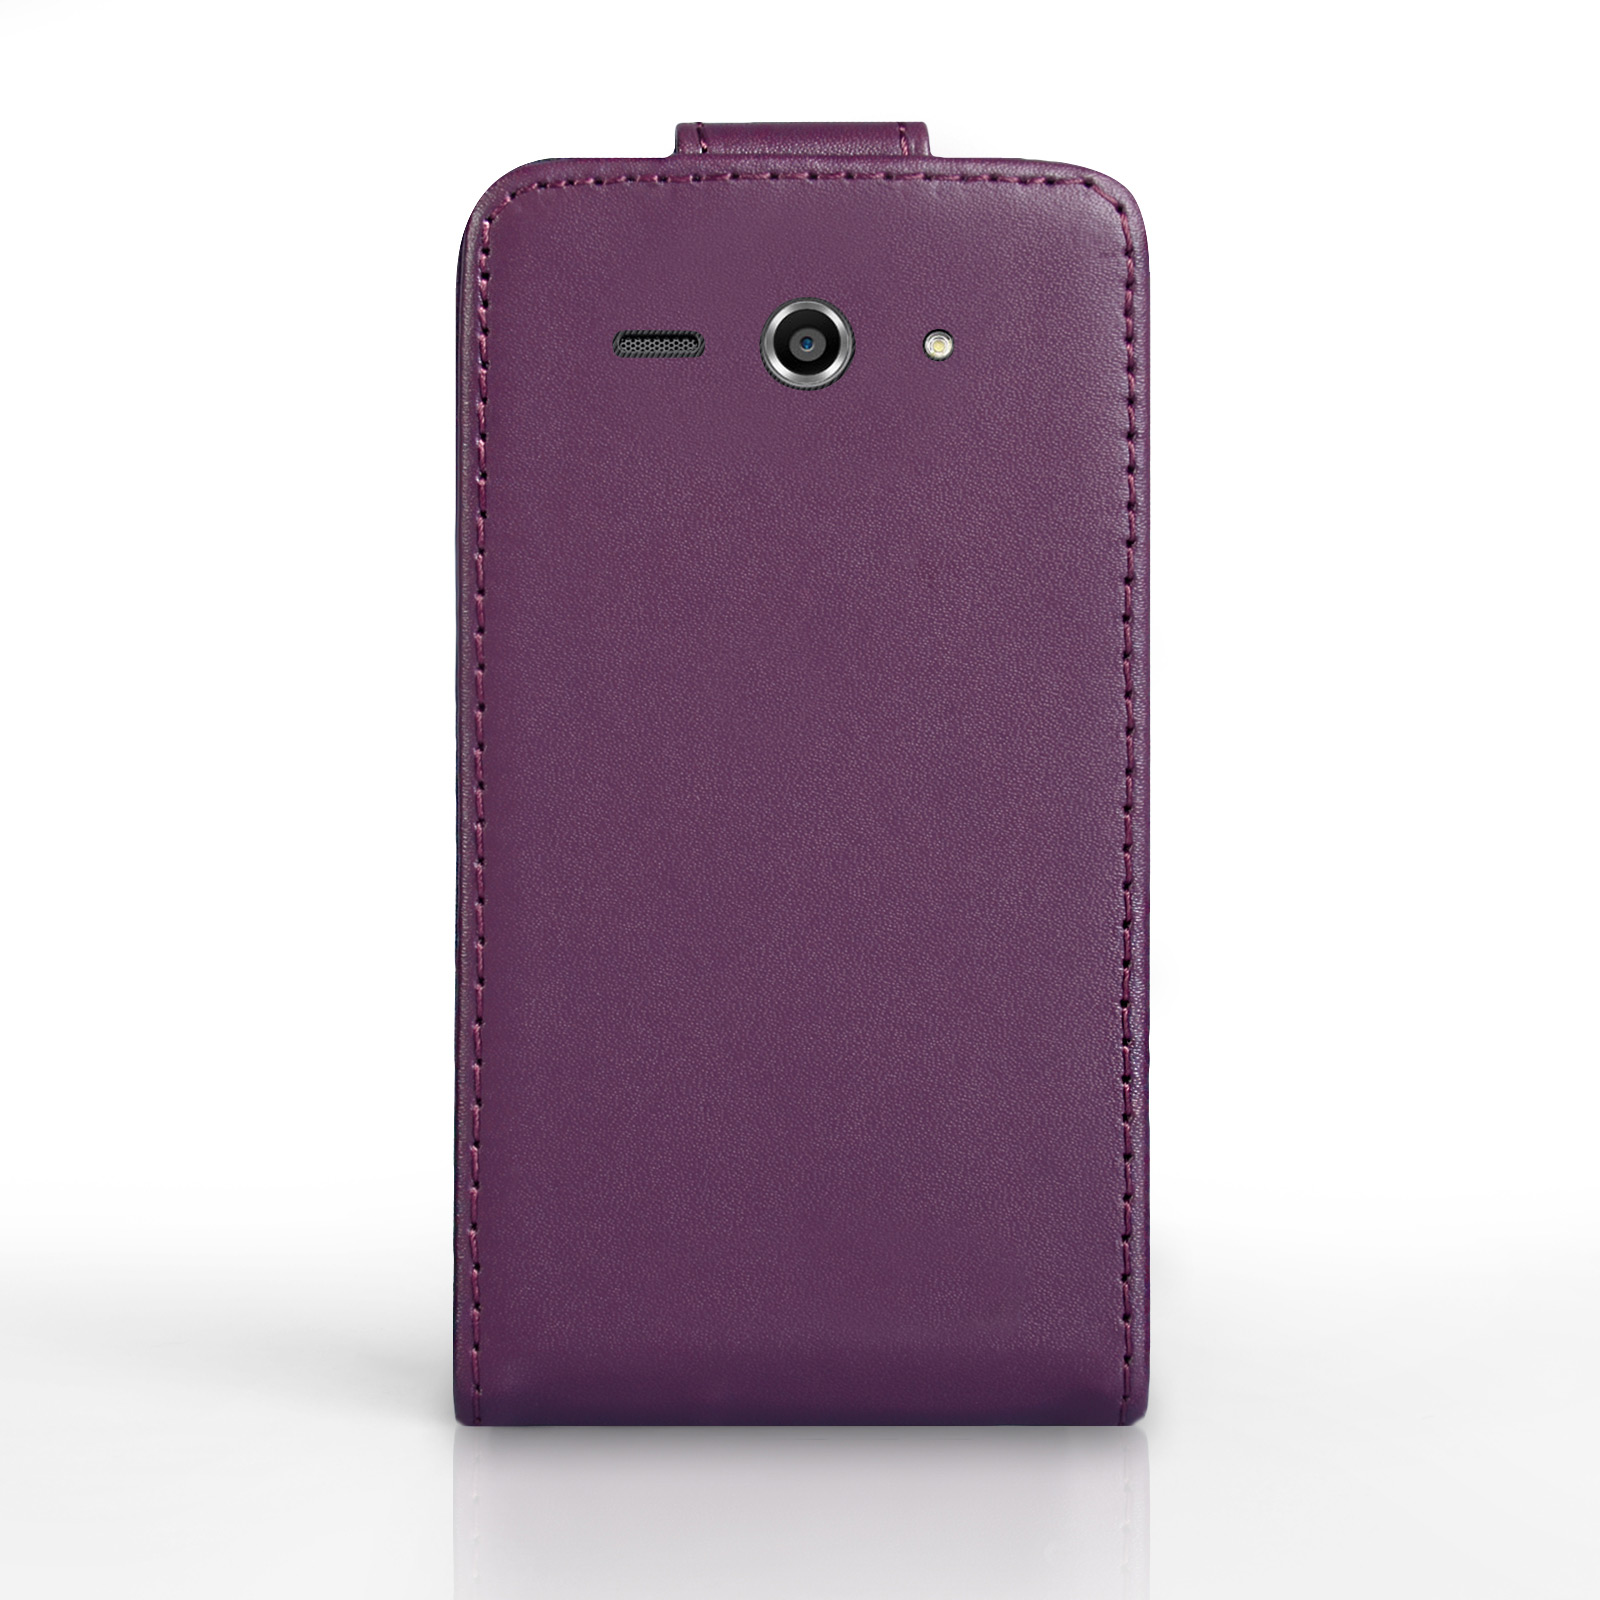 YouSave Huawei Ascend Y530 Leather-Effect Flip Case - Purple